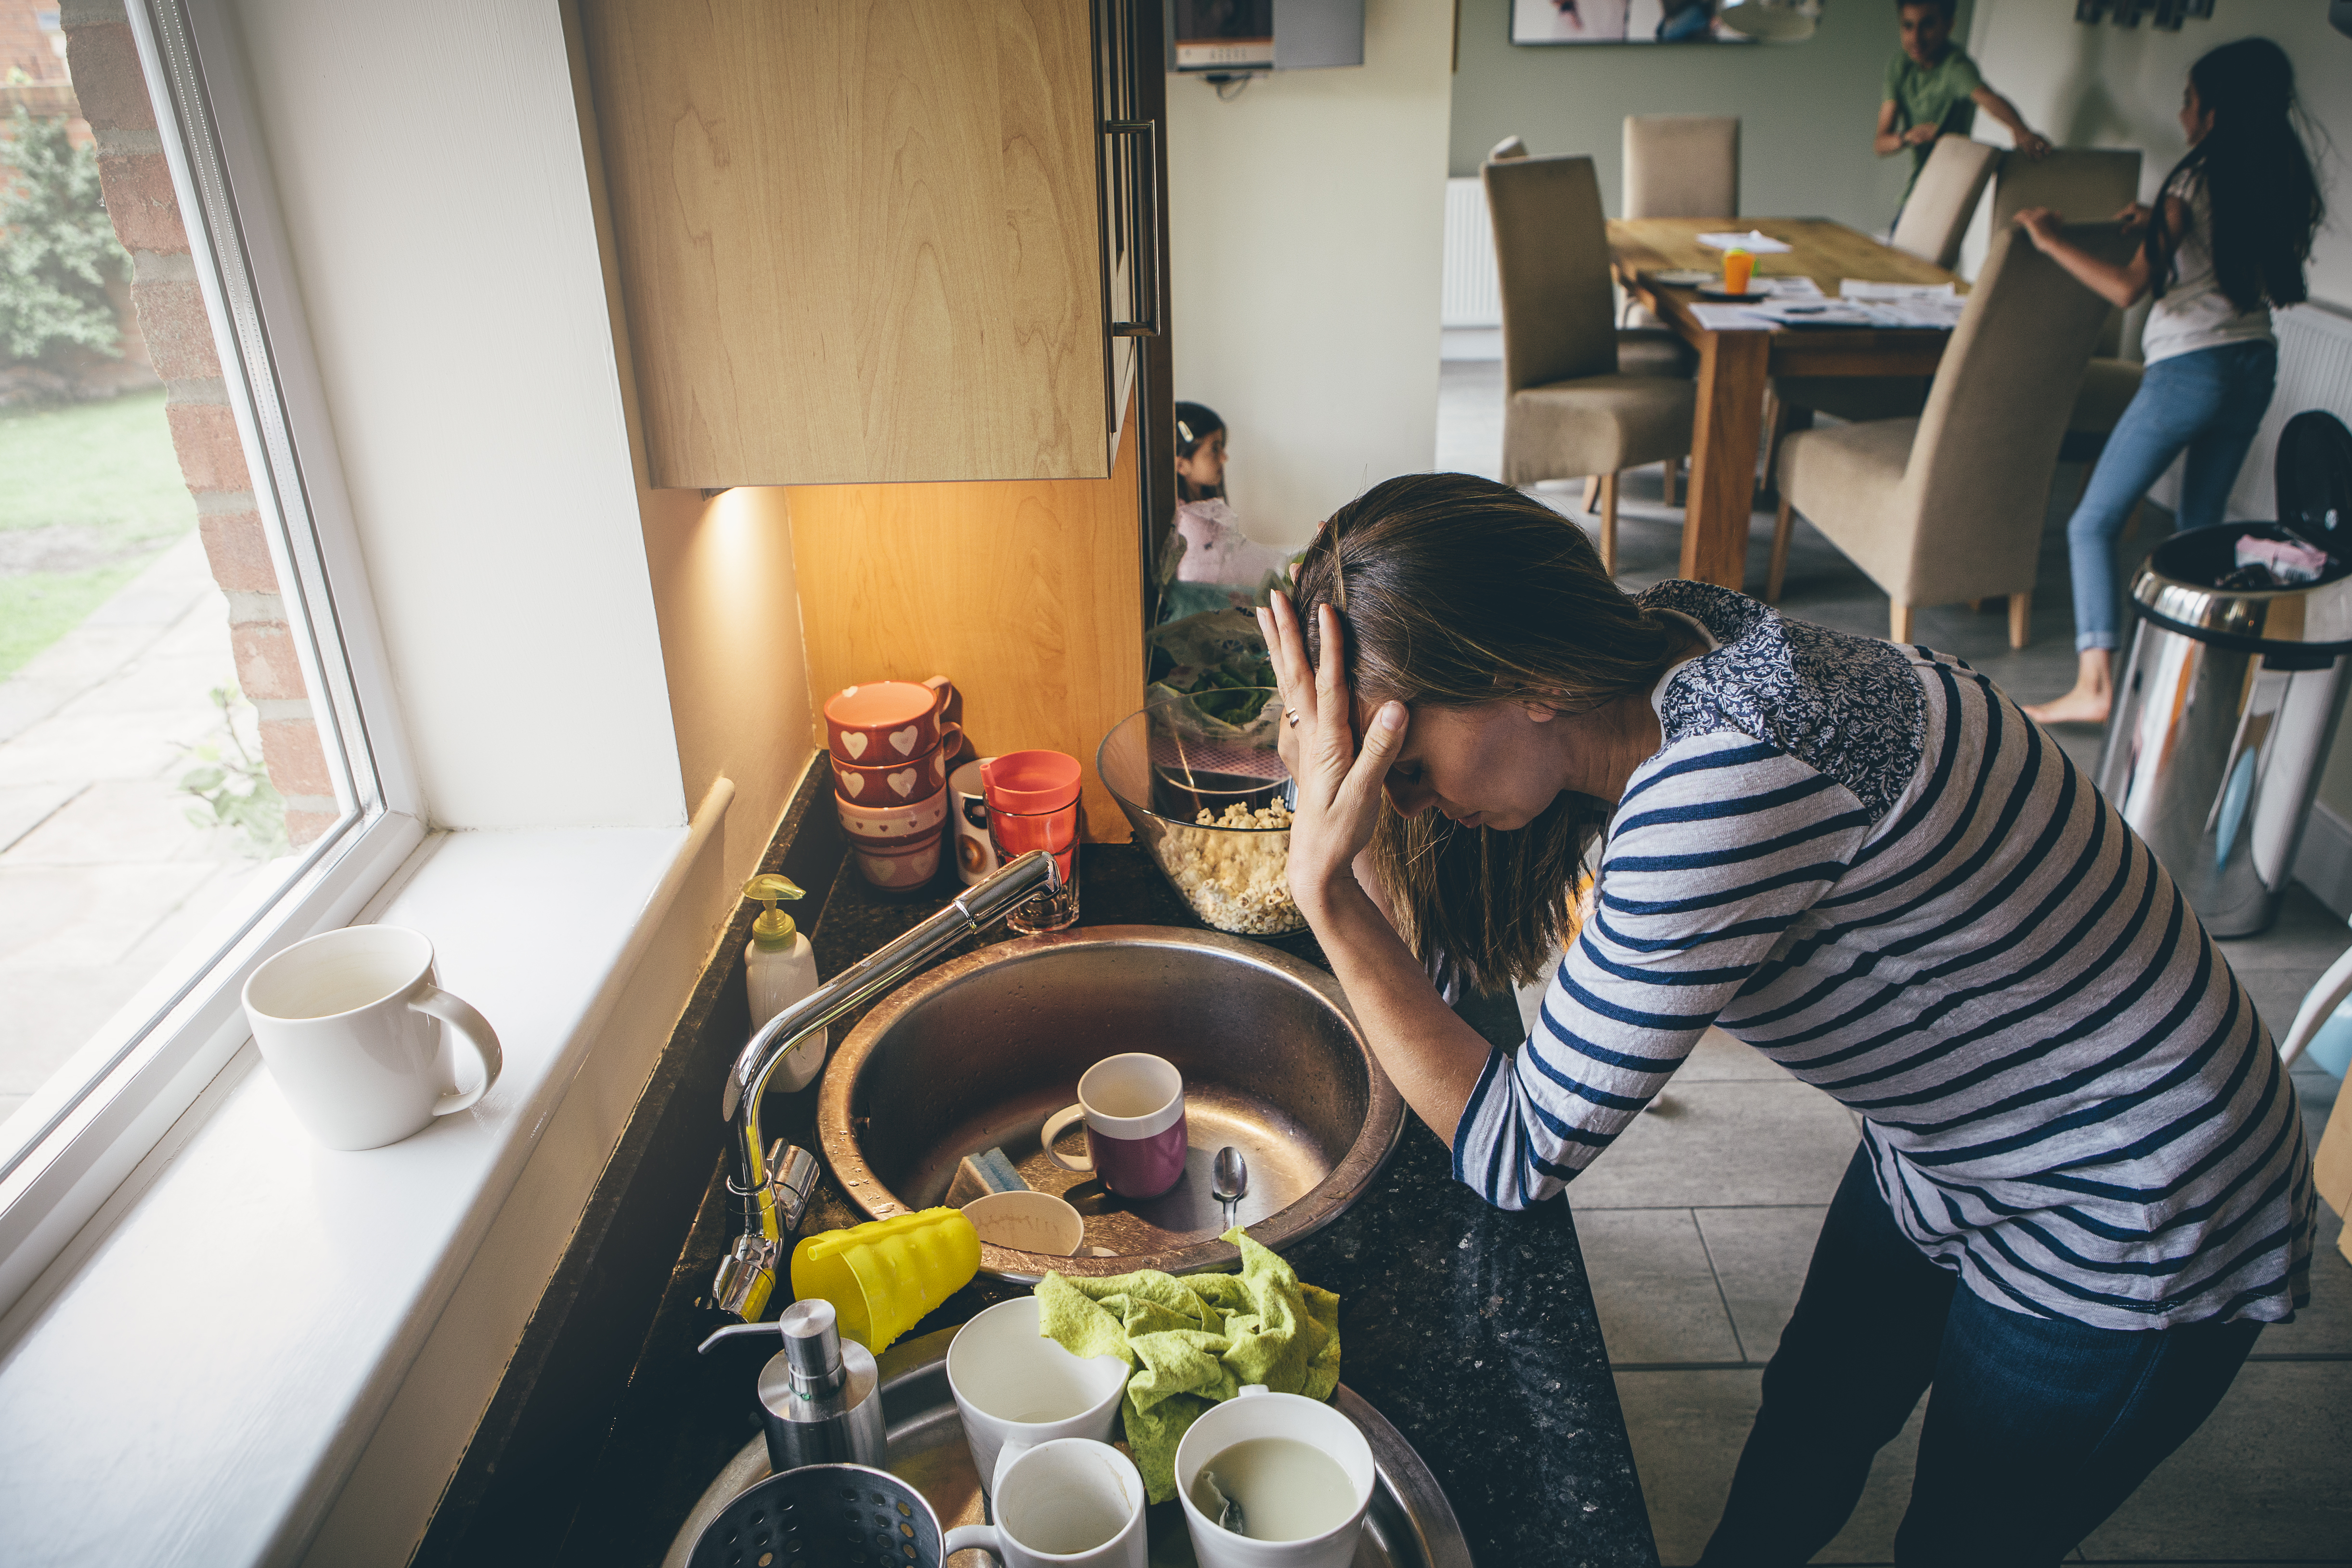 A woman leaning on a kitchen counter with her hand on her forehead | Source: Shutterstock